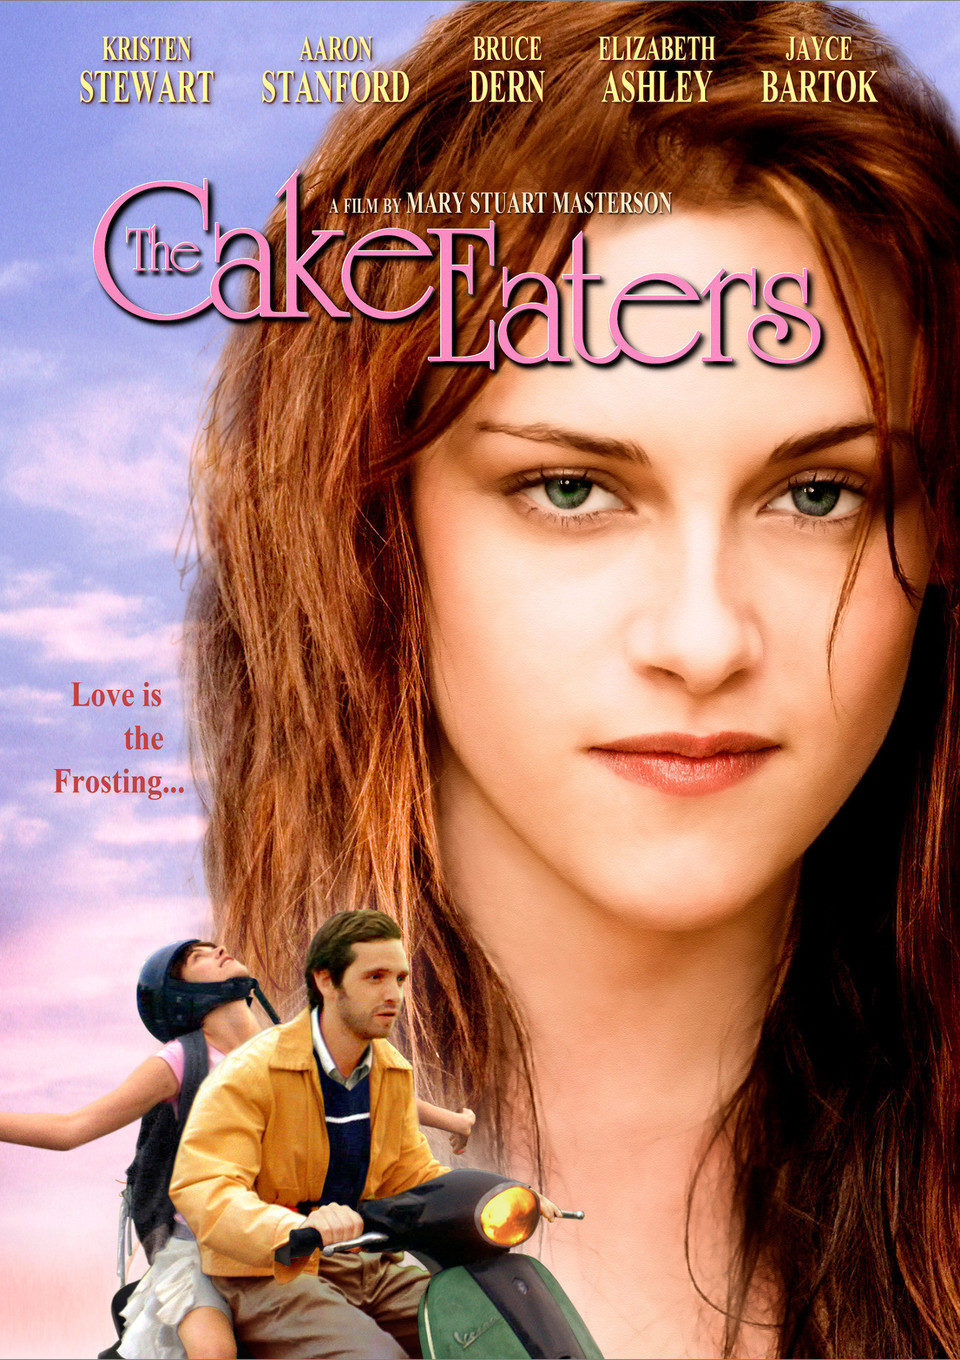 Cartel de The Cake Eaters - 'The Cake Eaters'